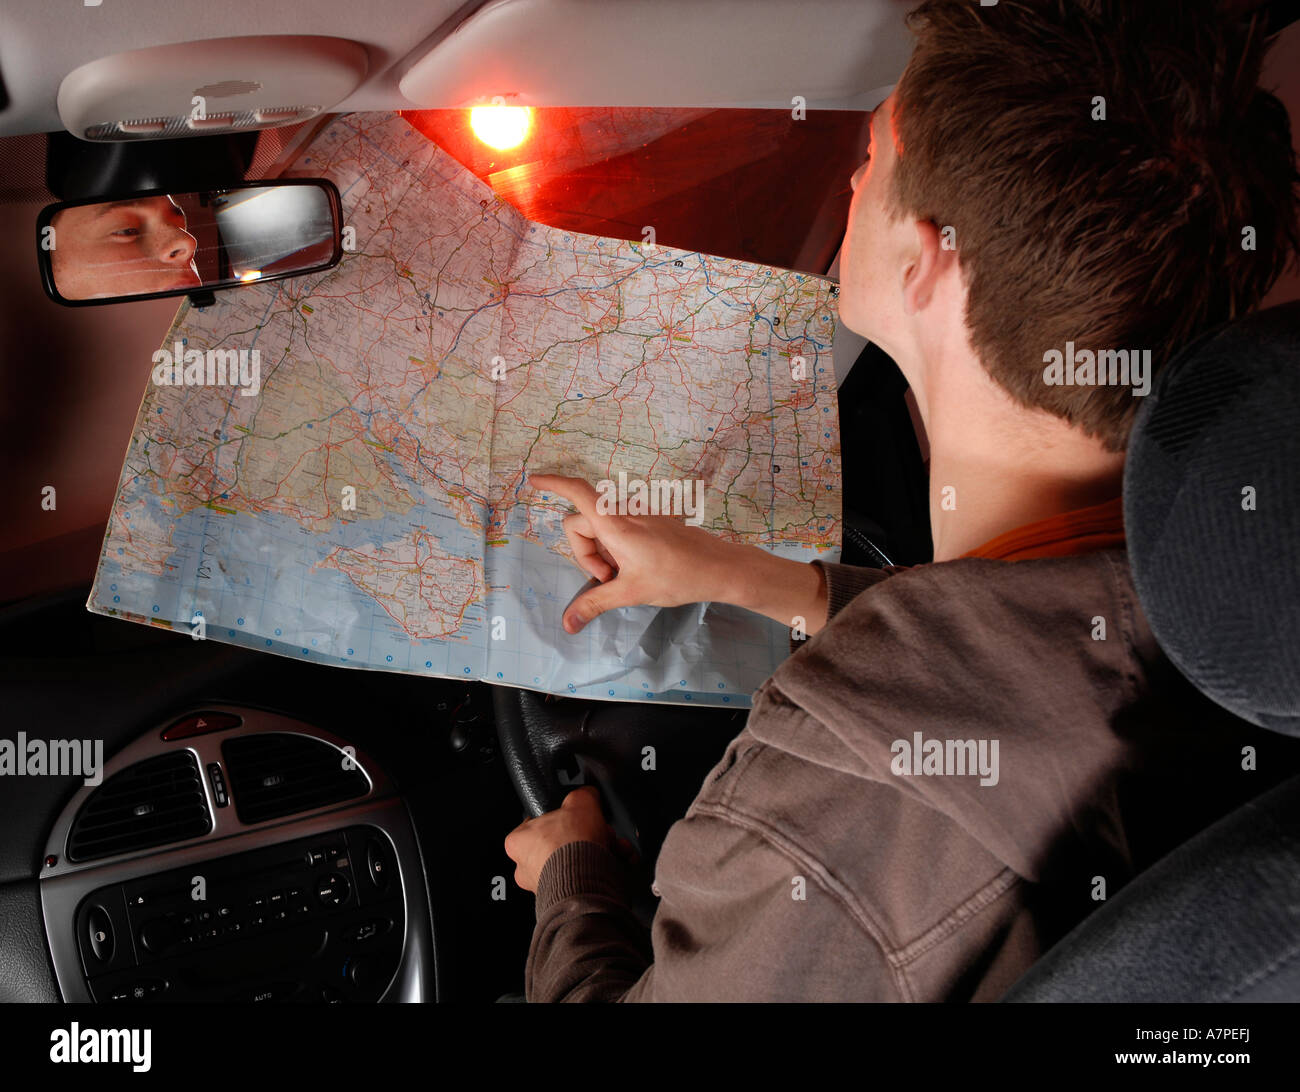 young-man-reading-a-map-while-driving-A7